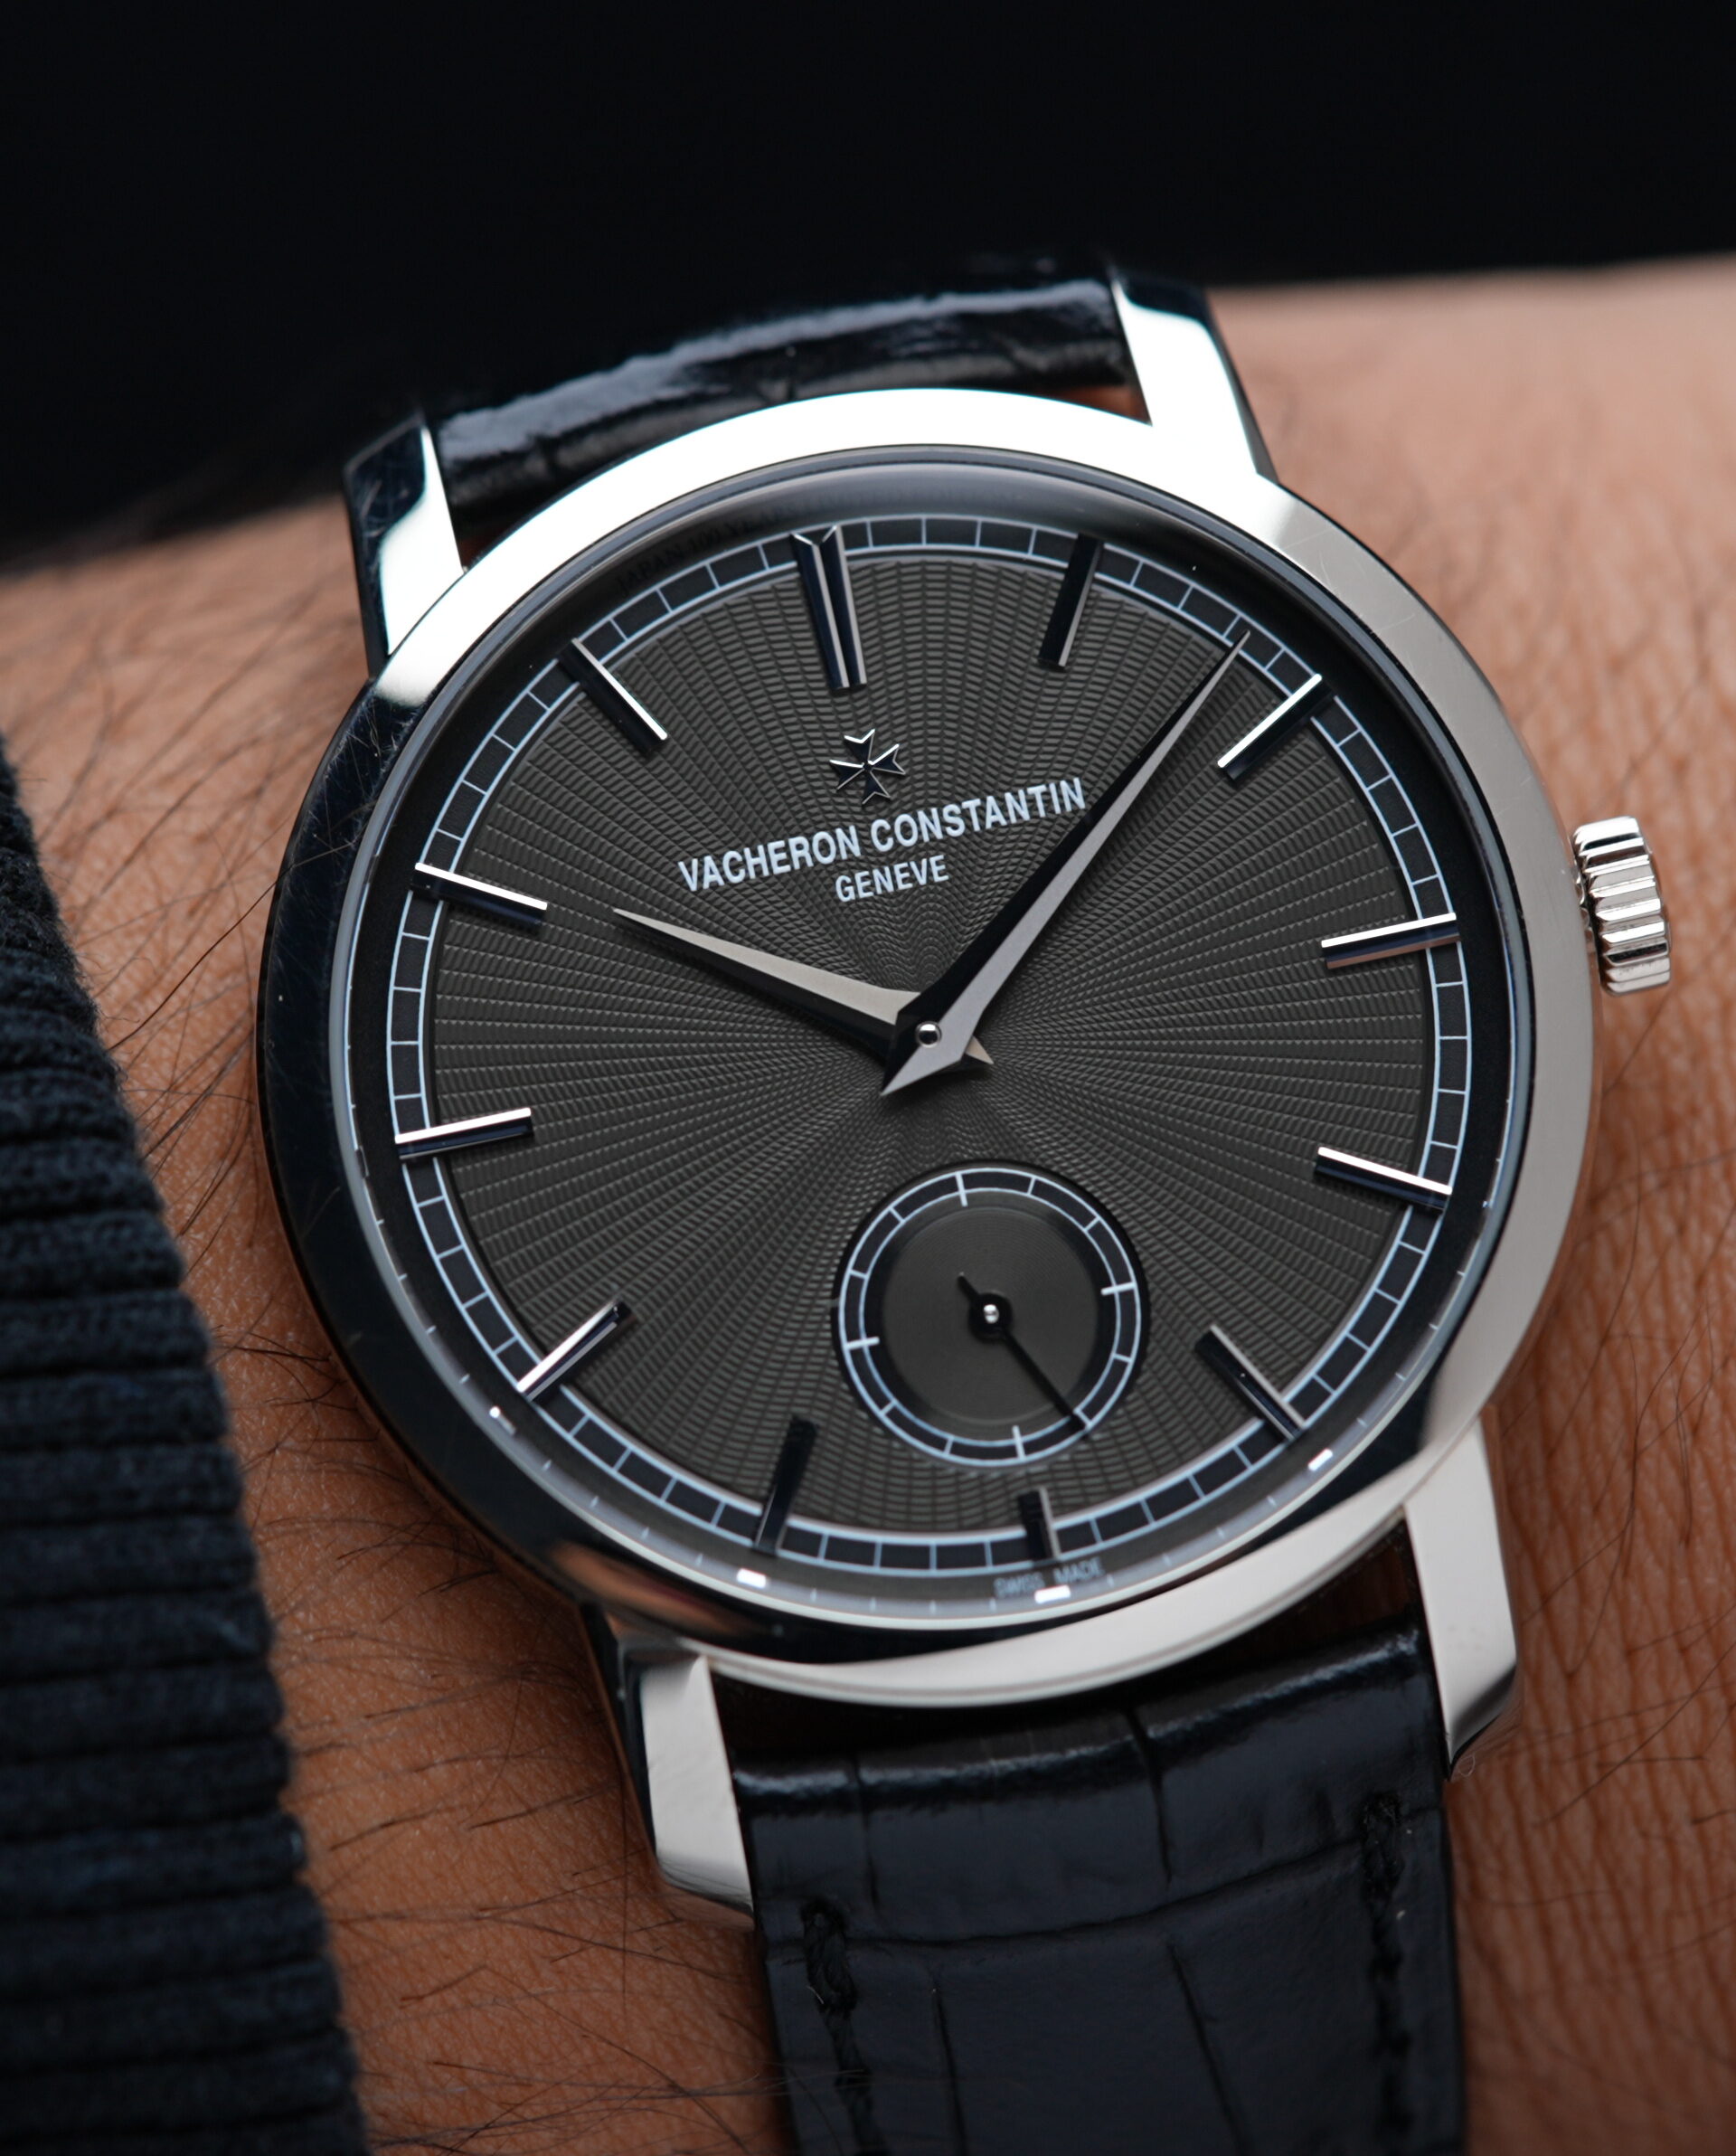 Vacheron Constantin Patrimony Traditional Japan 100th Anniversary watch featured on the wrist.